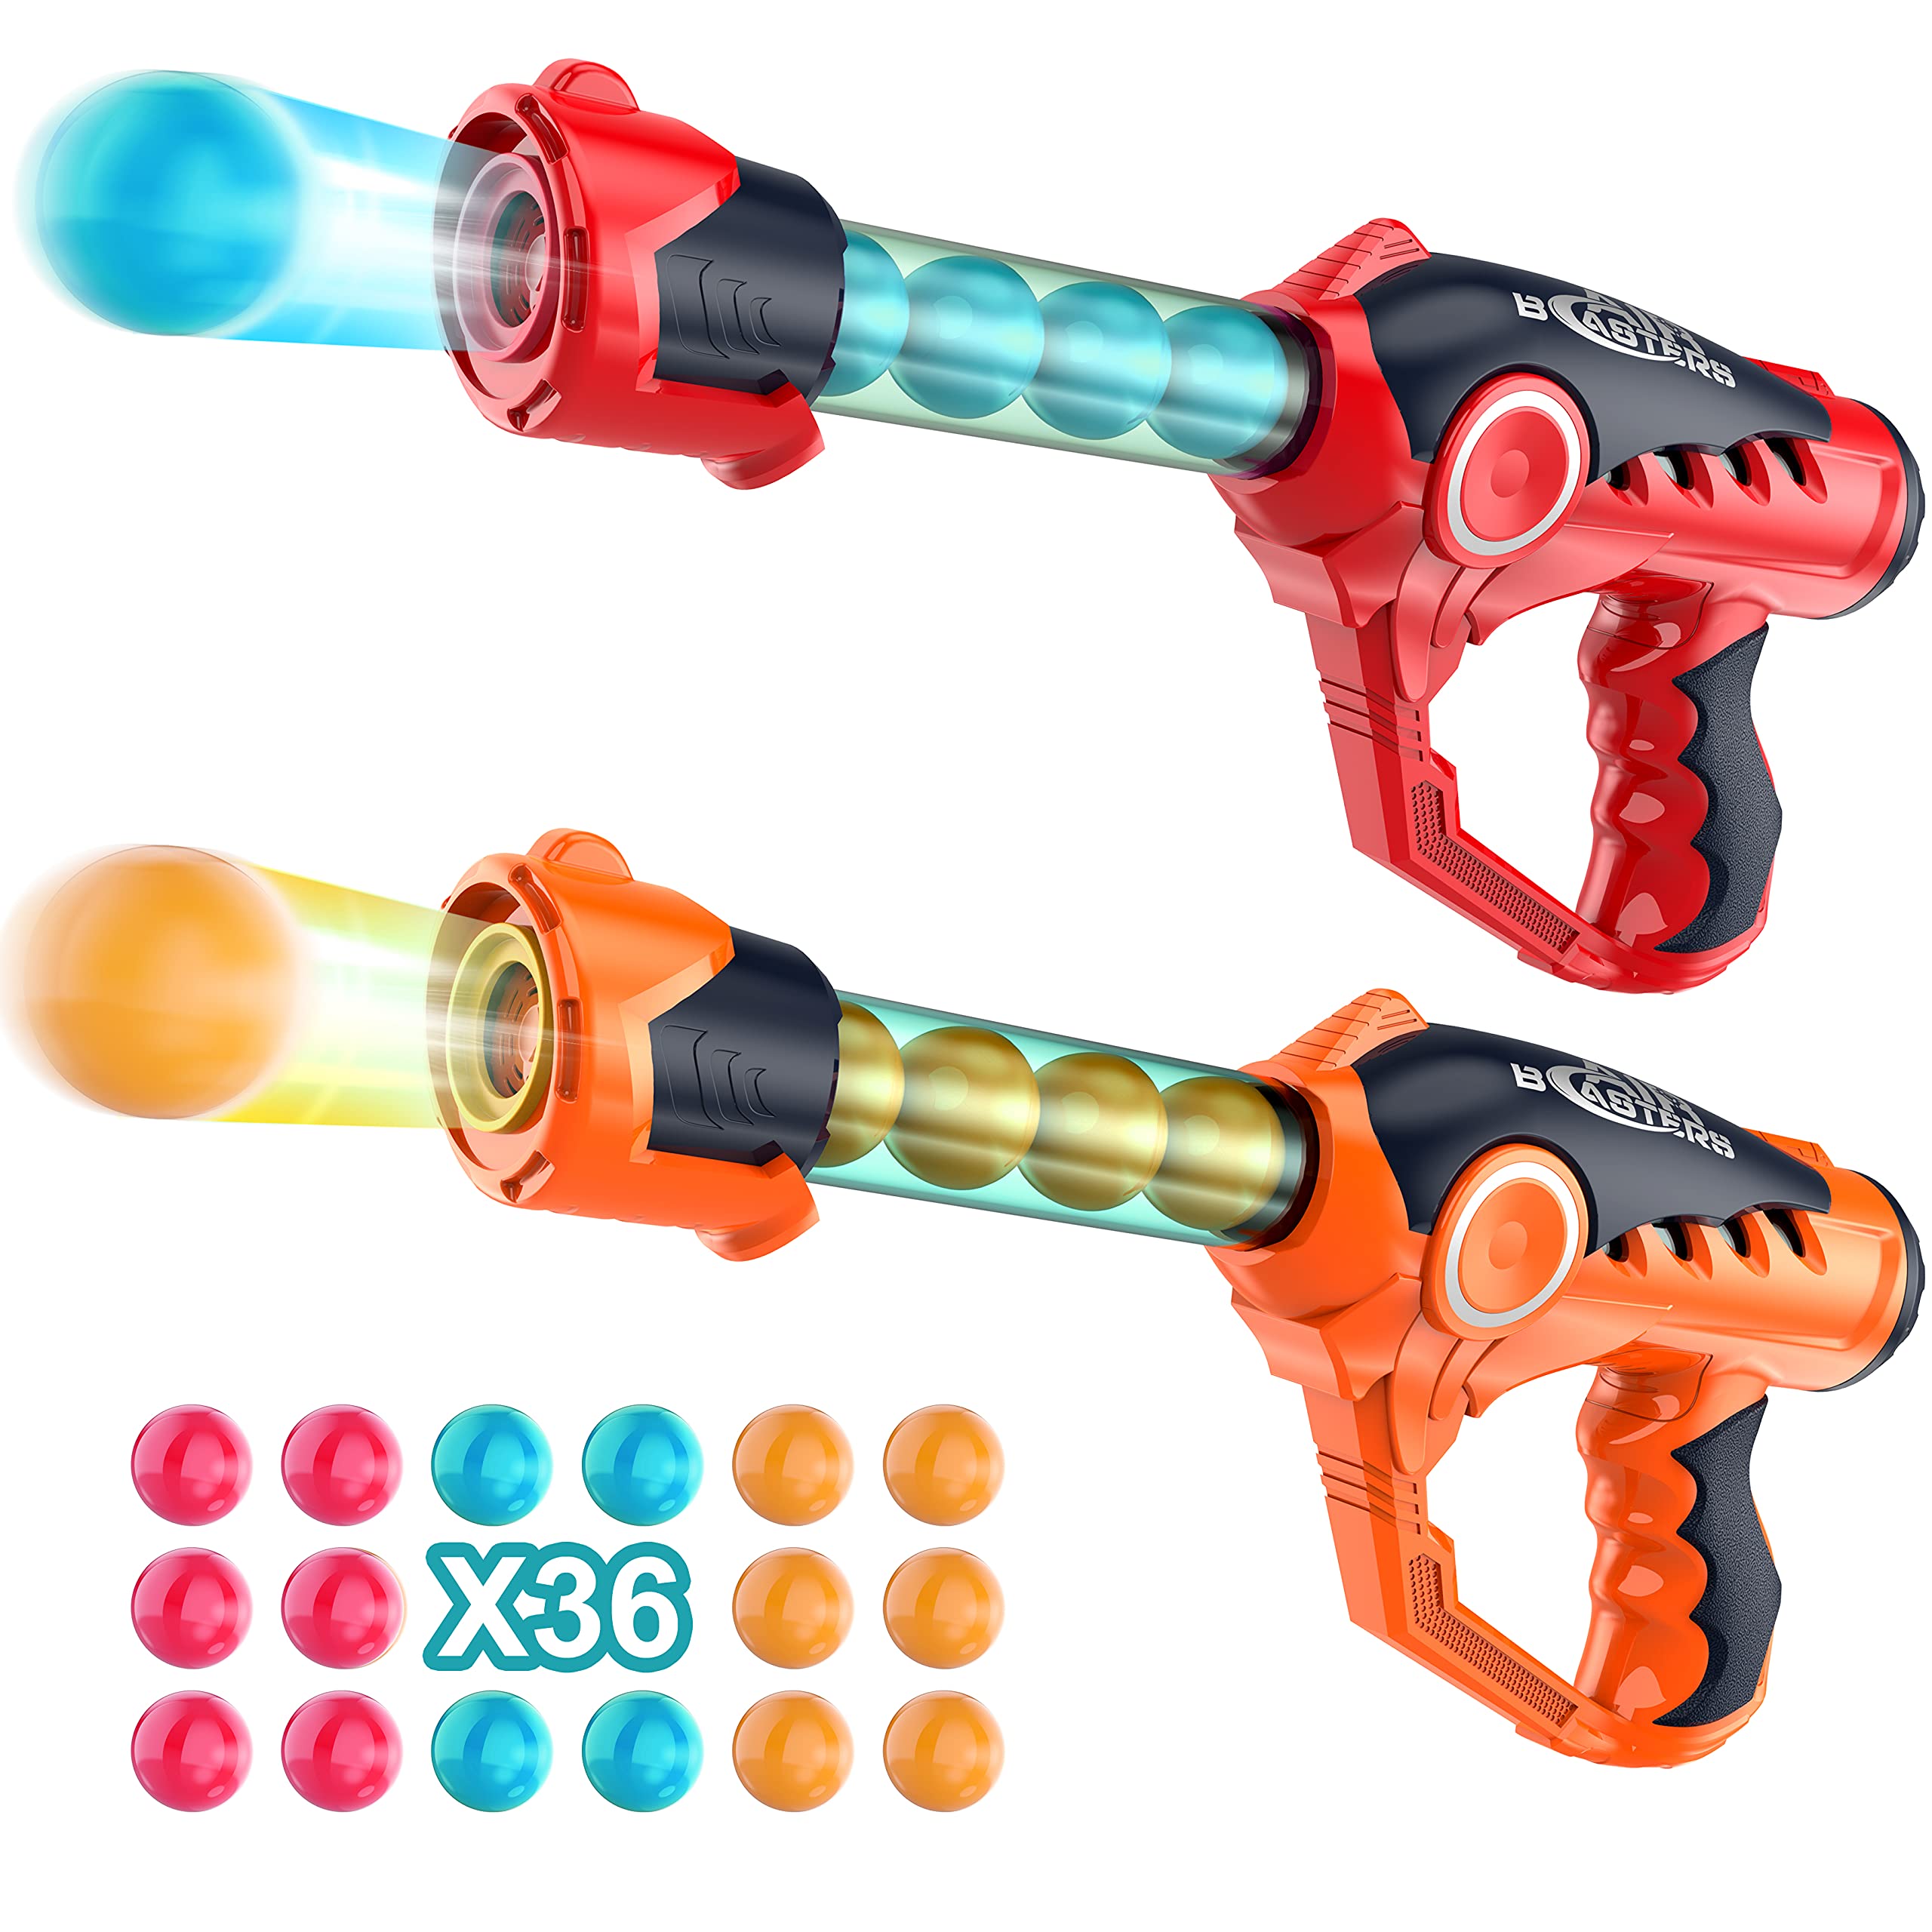 Shooting Game Toy for Age 6, 7, 8, 9, 10+ Years Old Kids, Girls, Boys - Foam Ball Popper Air Guns Toy & 36 Foam Bullet Balls, Sniper Kids Gun Toy Indoor Outdoor Yard Games, Xmas Gift Idea for 6-12+